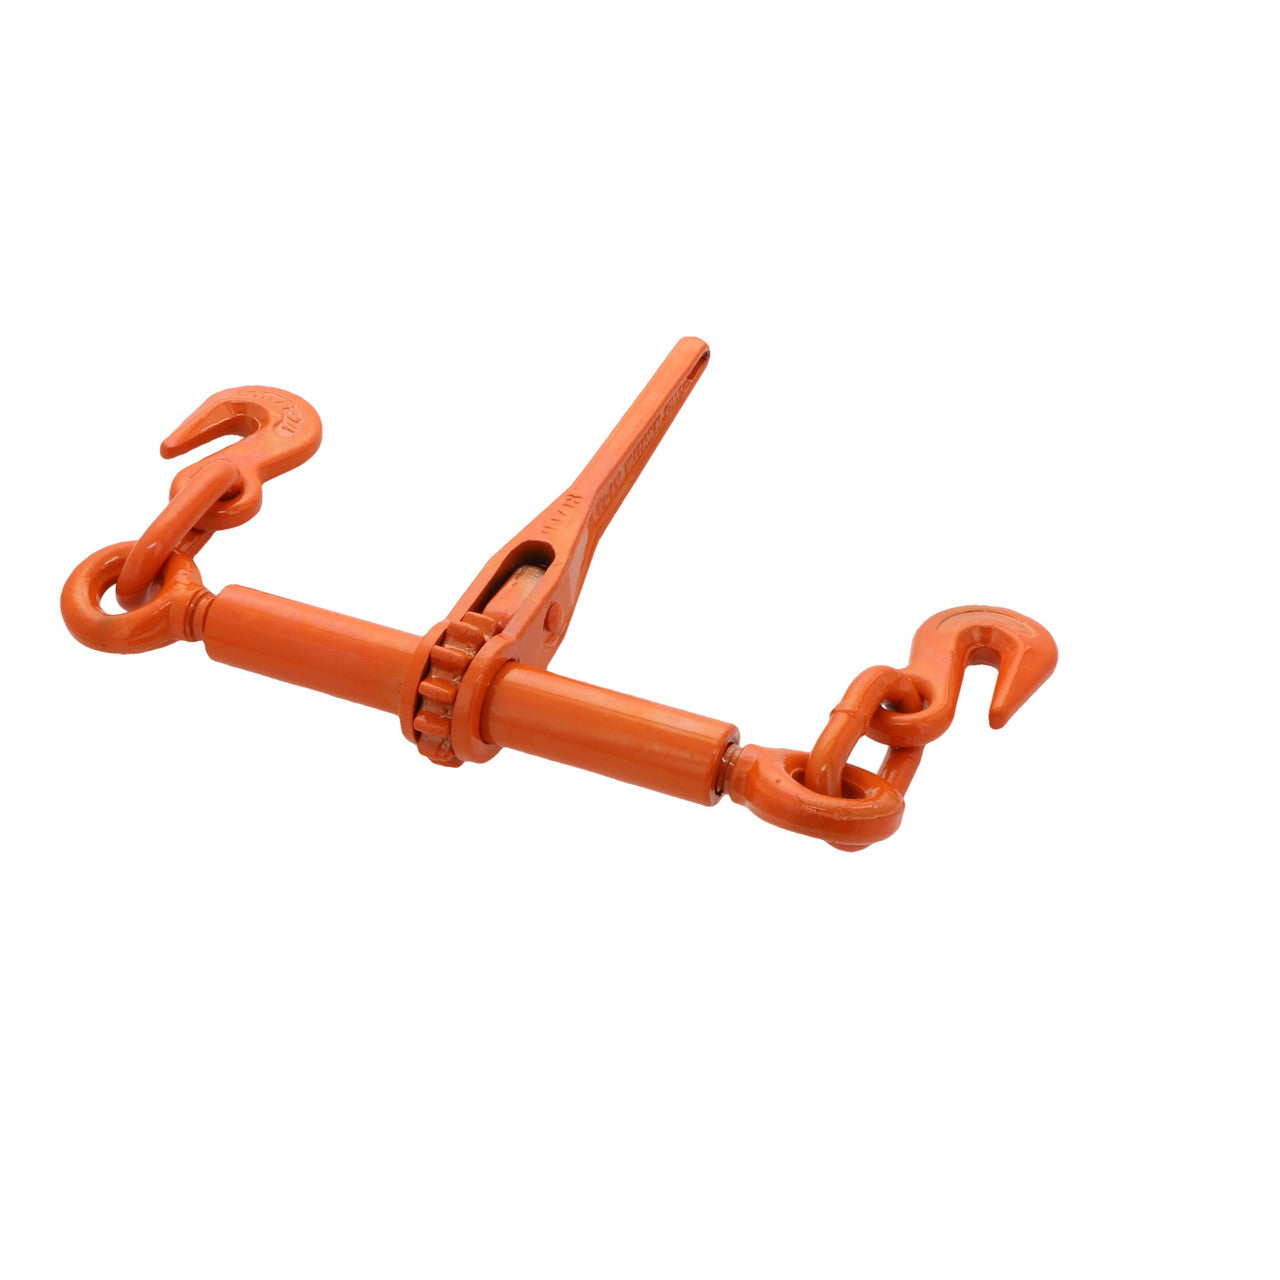 Kinedyne Saf-T-Binder Ratchet Style Chain Binder for 5/16" - 3/8" Chains